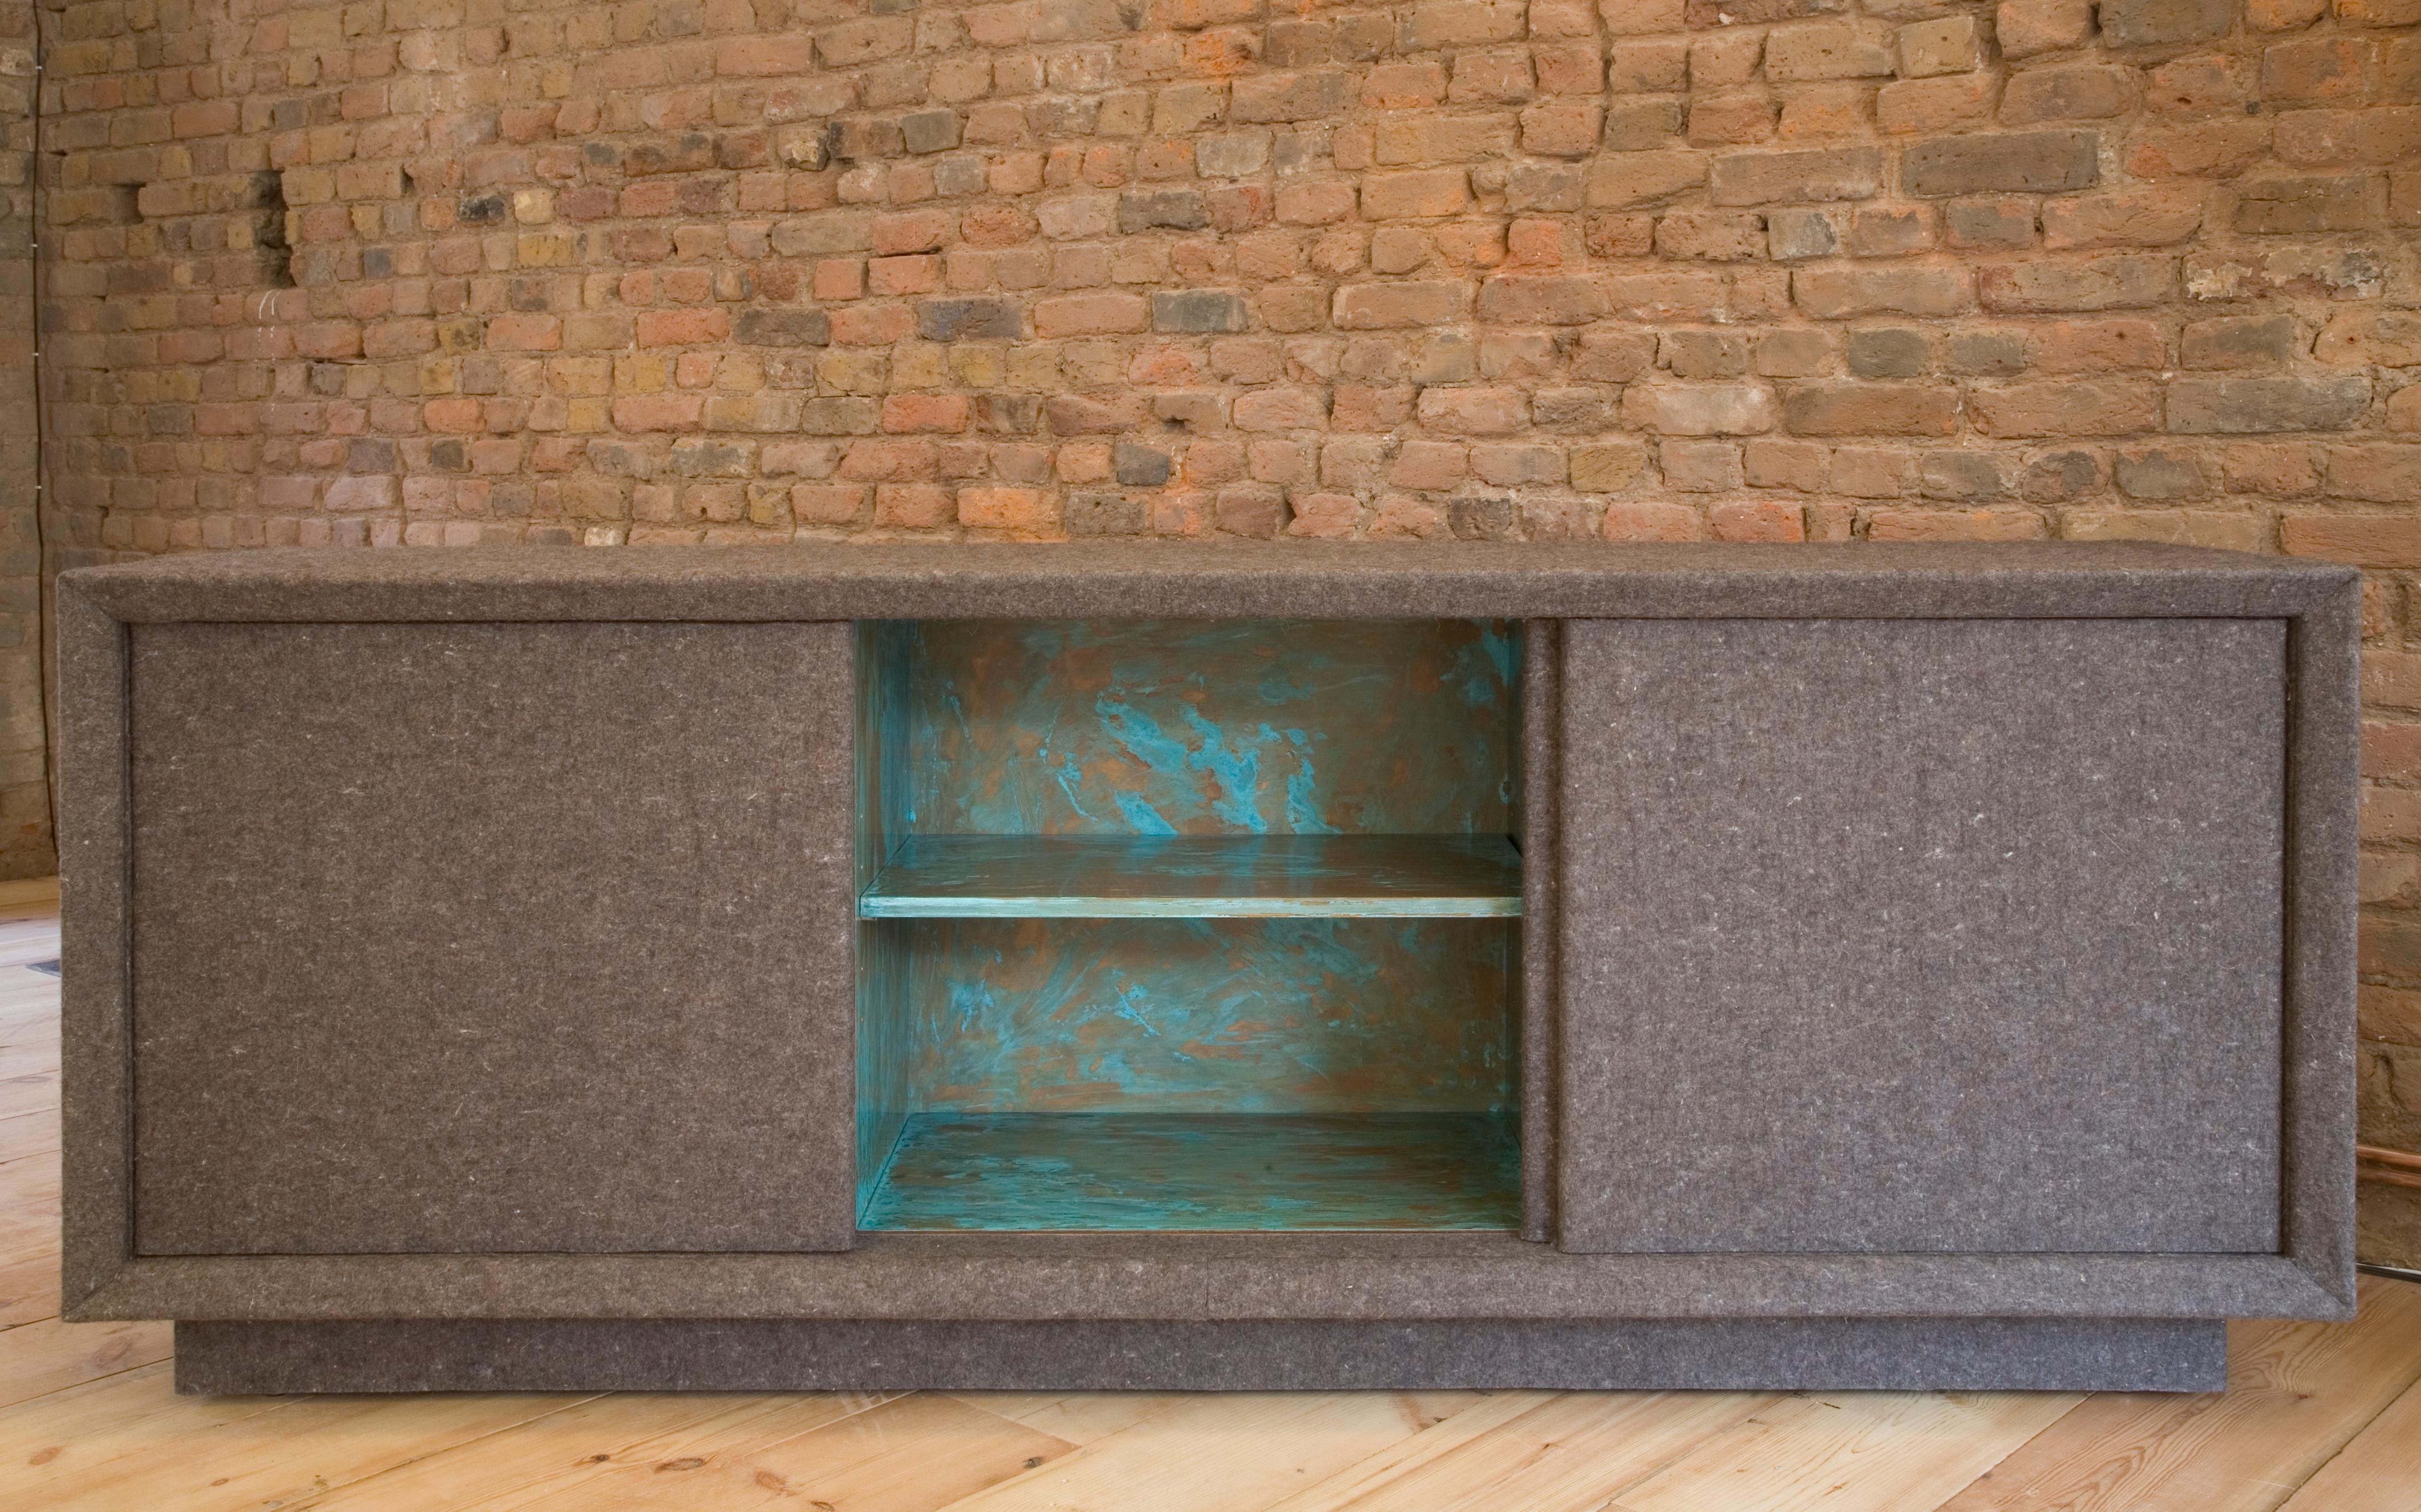 Wrapped in 5mm industrial felt with an interior of walnut, patinated and polished copper with a combination of drawers and adjustable shelving accessed through 3 top hung sliding doors.
This piece is my homage to Joseph Beuys but with more than a